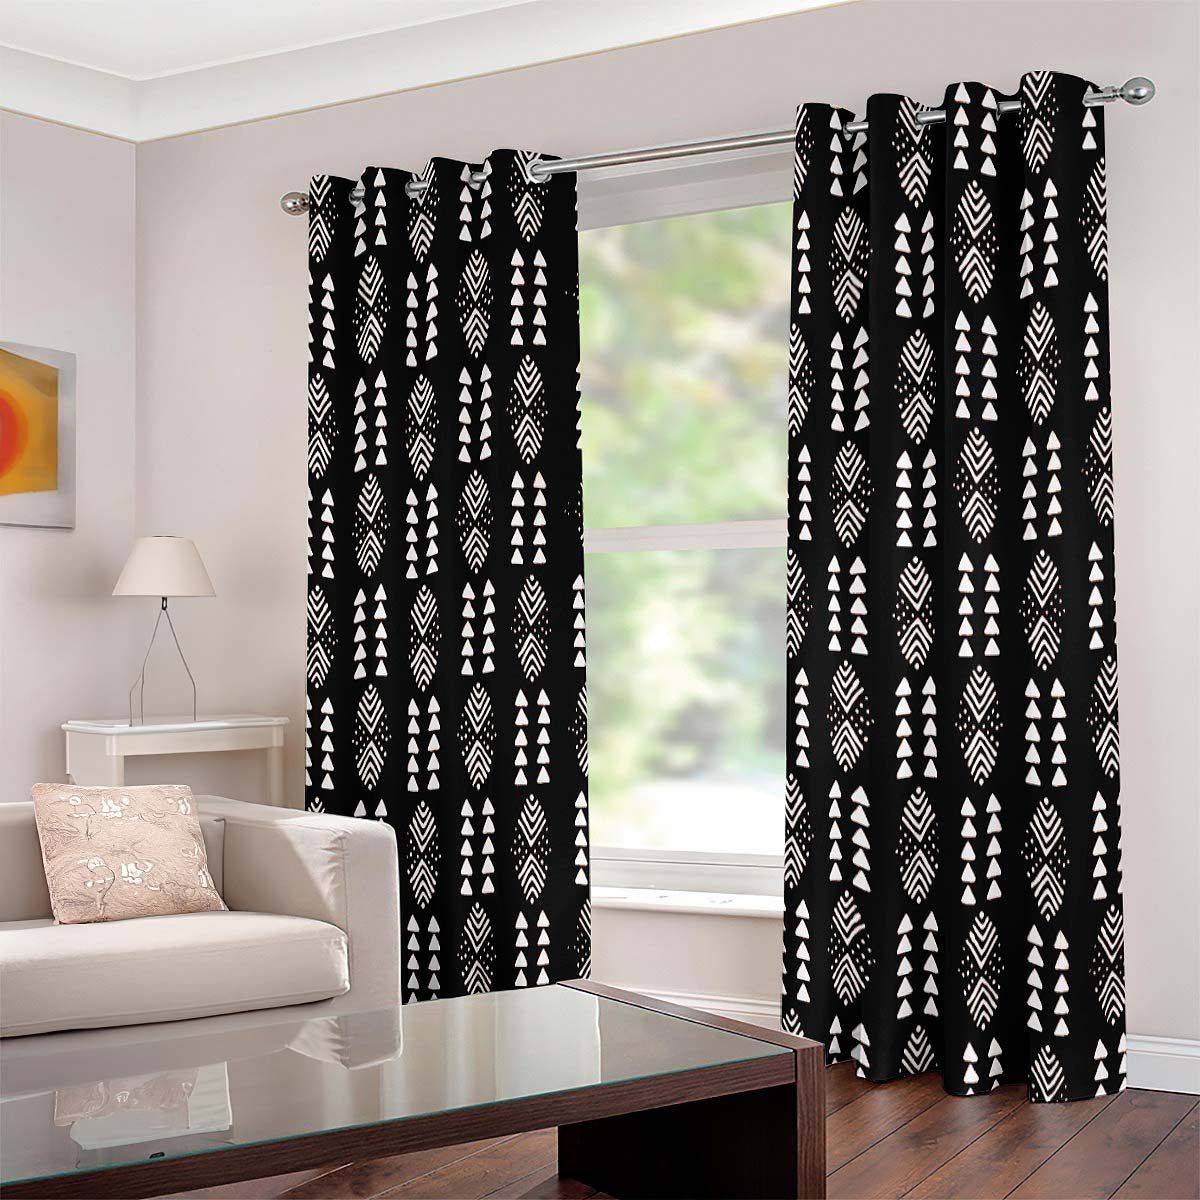 African Window Curtains Grommet Tribal Print Black and White